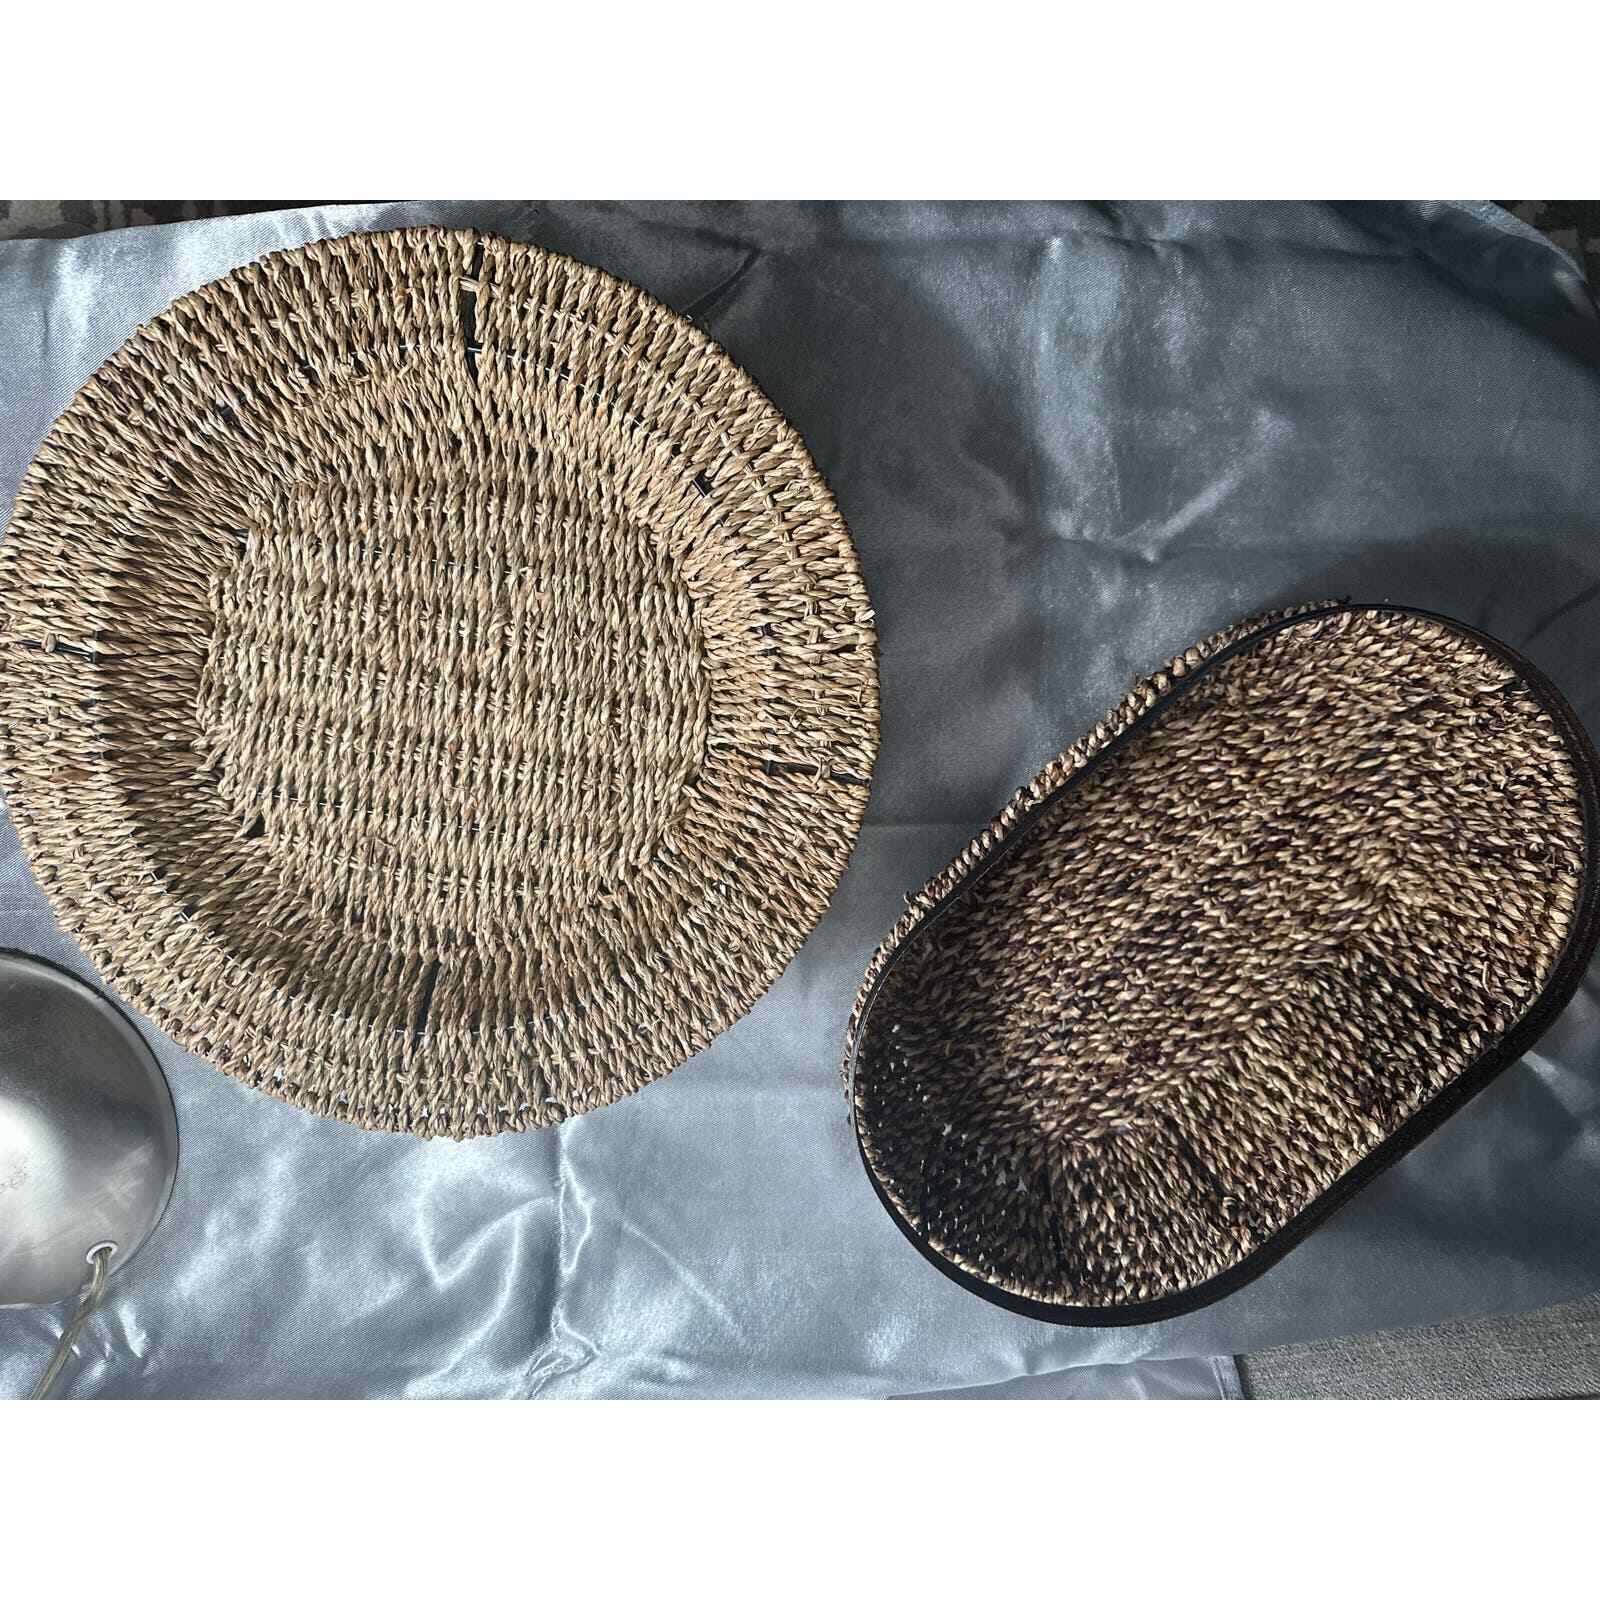 Handmade Natural Color 6 large Chargers and 1 Bread Basket 